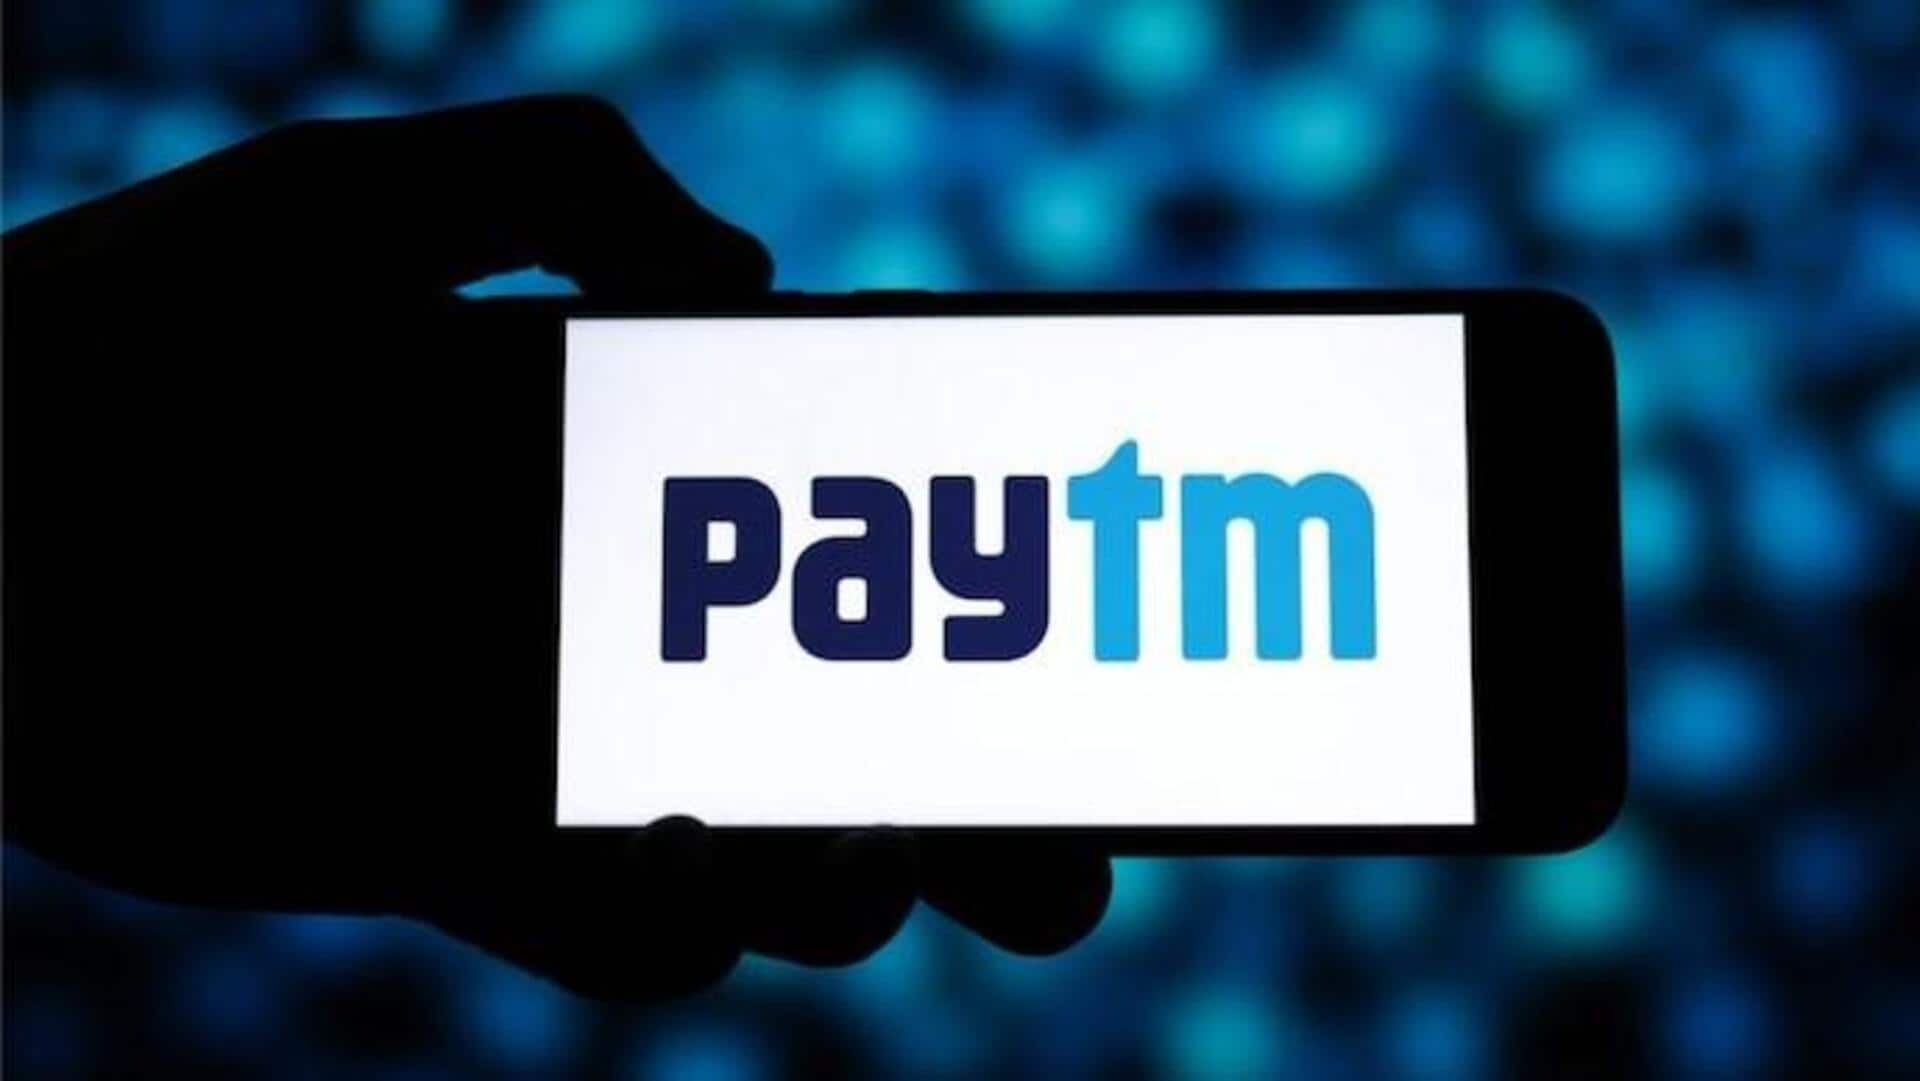 Start-up founders urge PM Modi, RBI to reconsider Paytm curbs